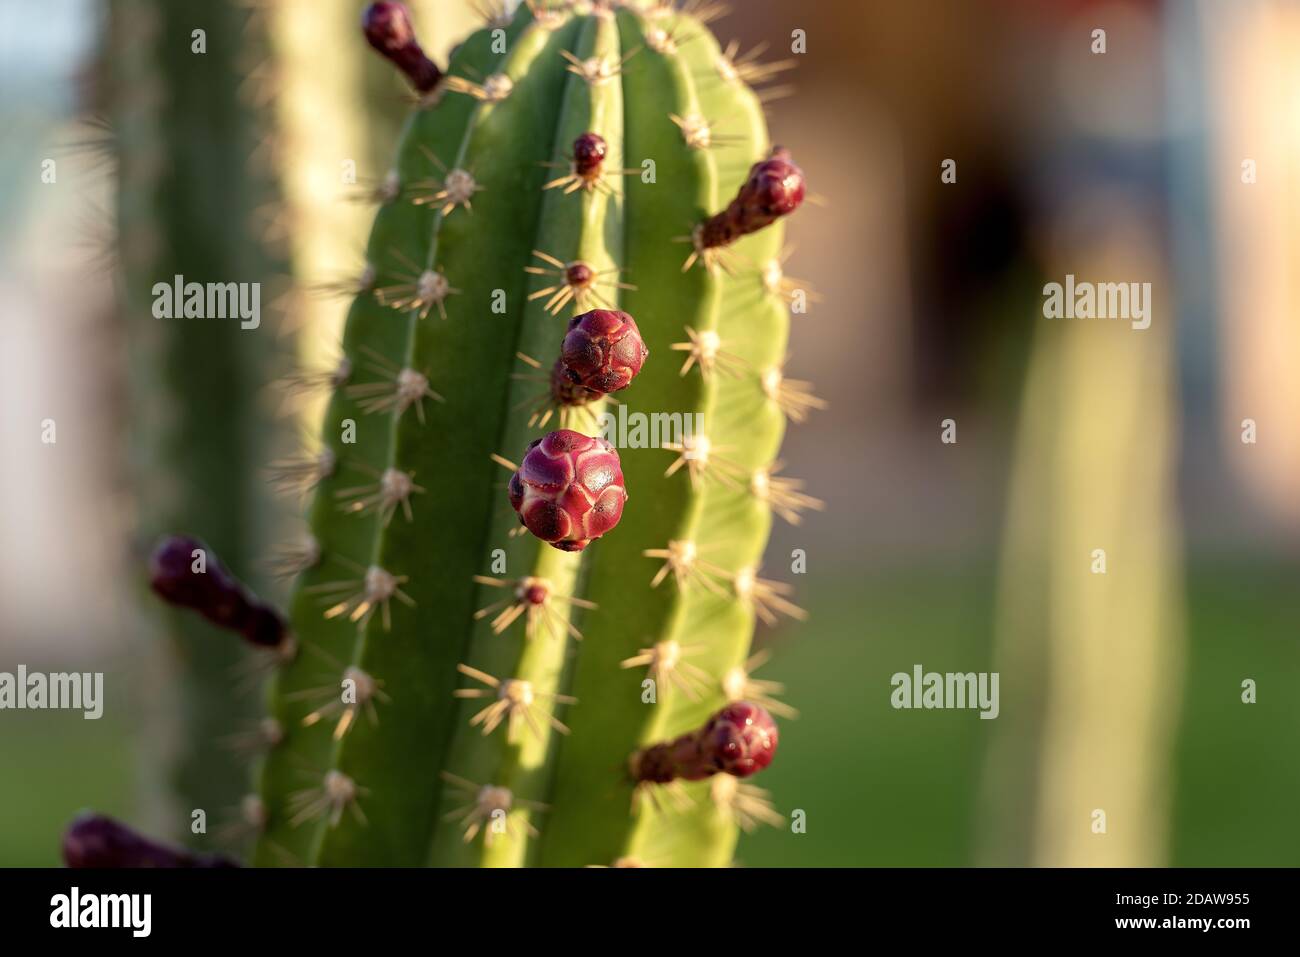 Close-up of red flower buds of a green cactus, succulent plant. Egypt, Africa. Stock Photo